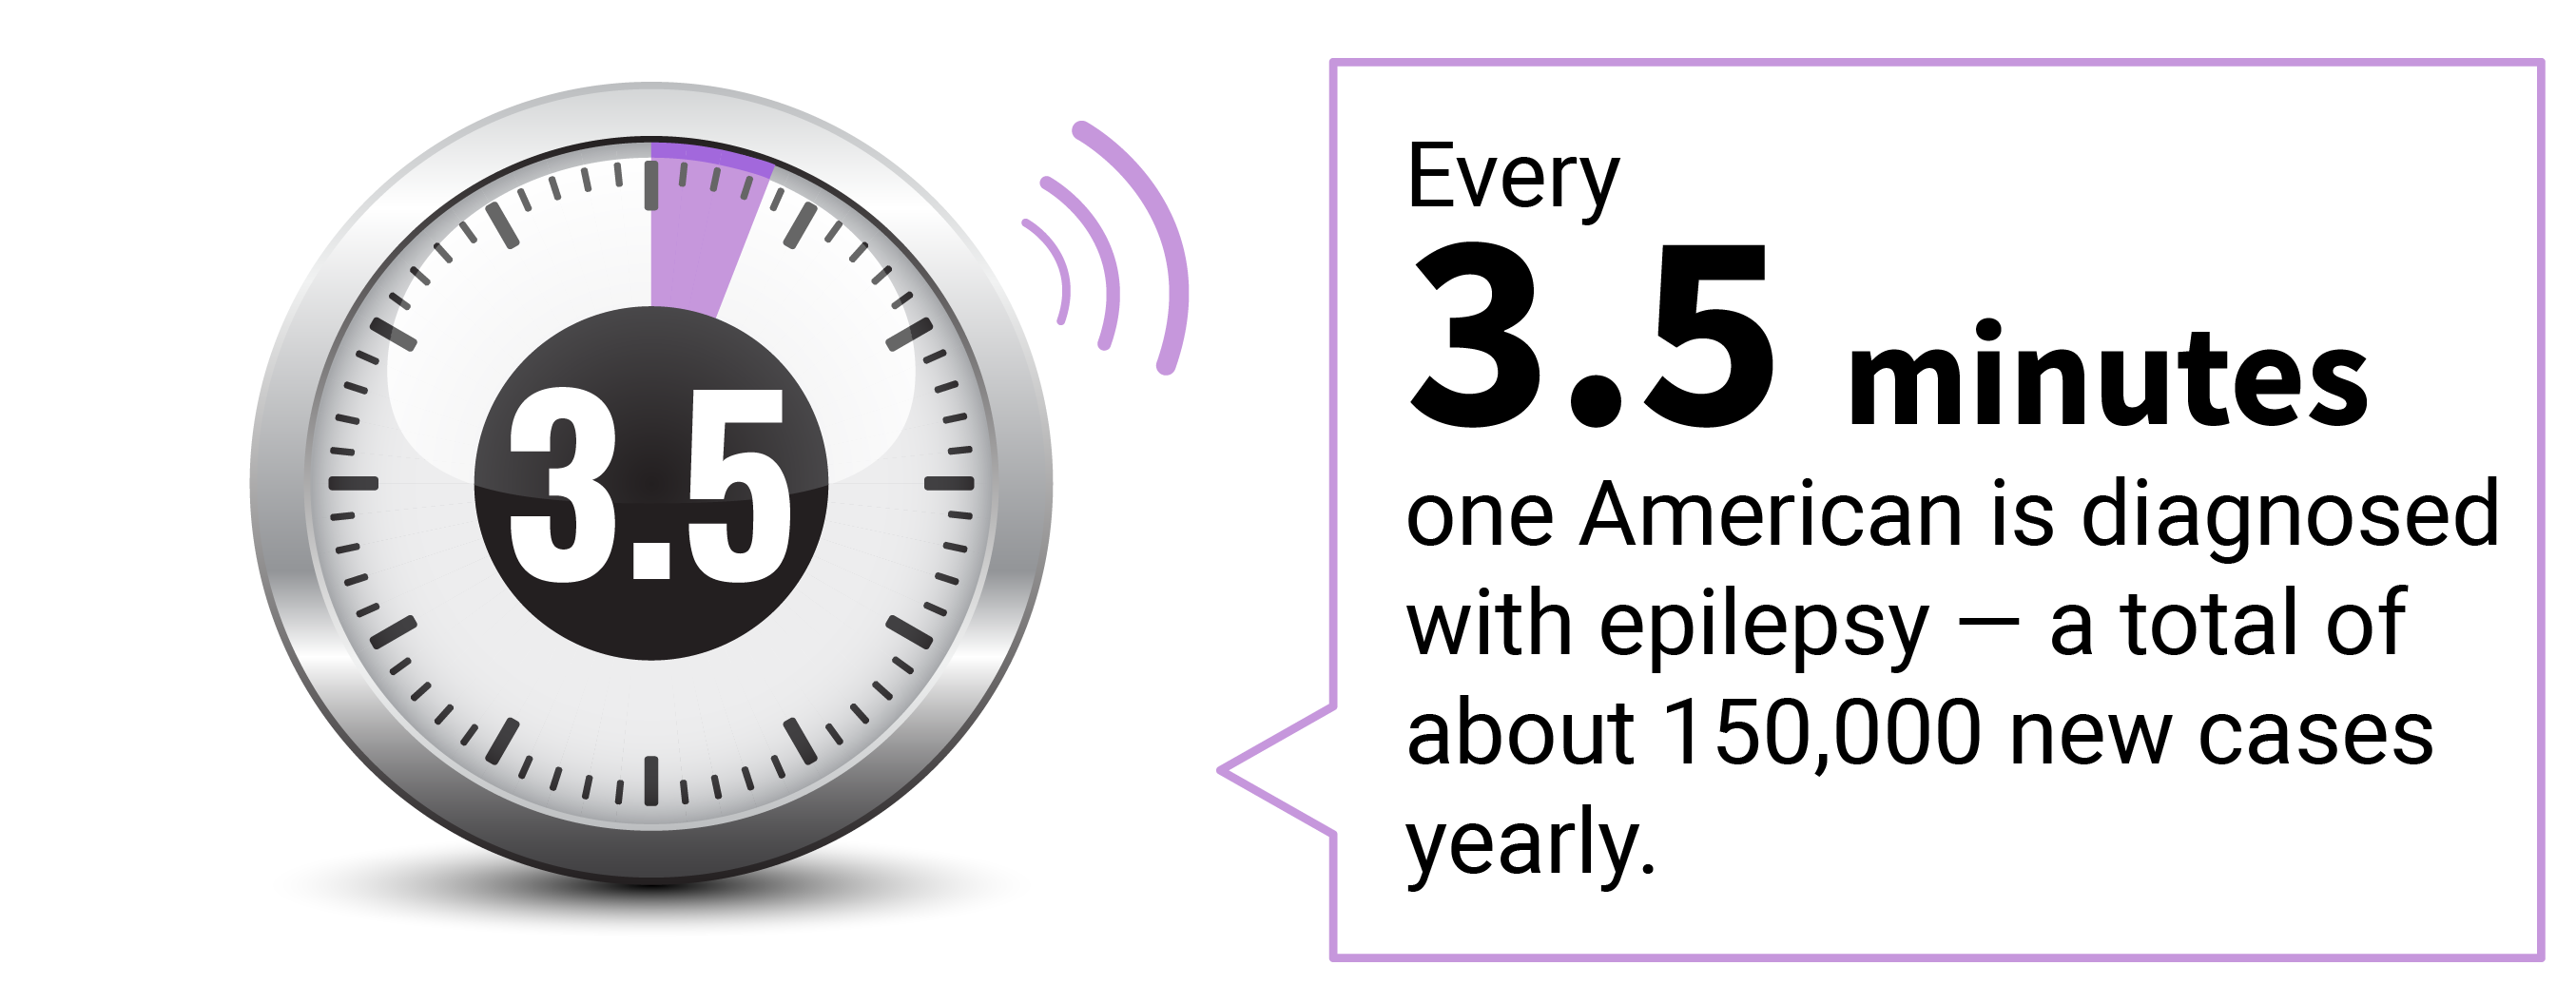 Call out text box saying one person gets diagnosed with epilepsy every 3.5 minutes (150,000 new cases per year).